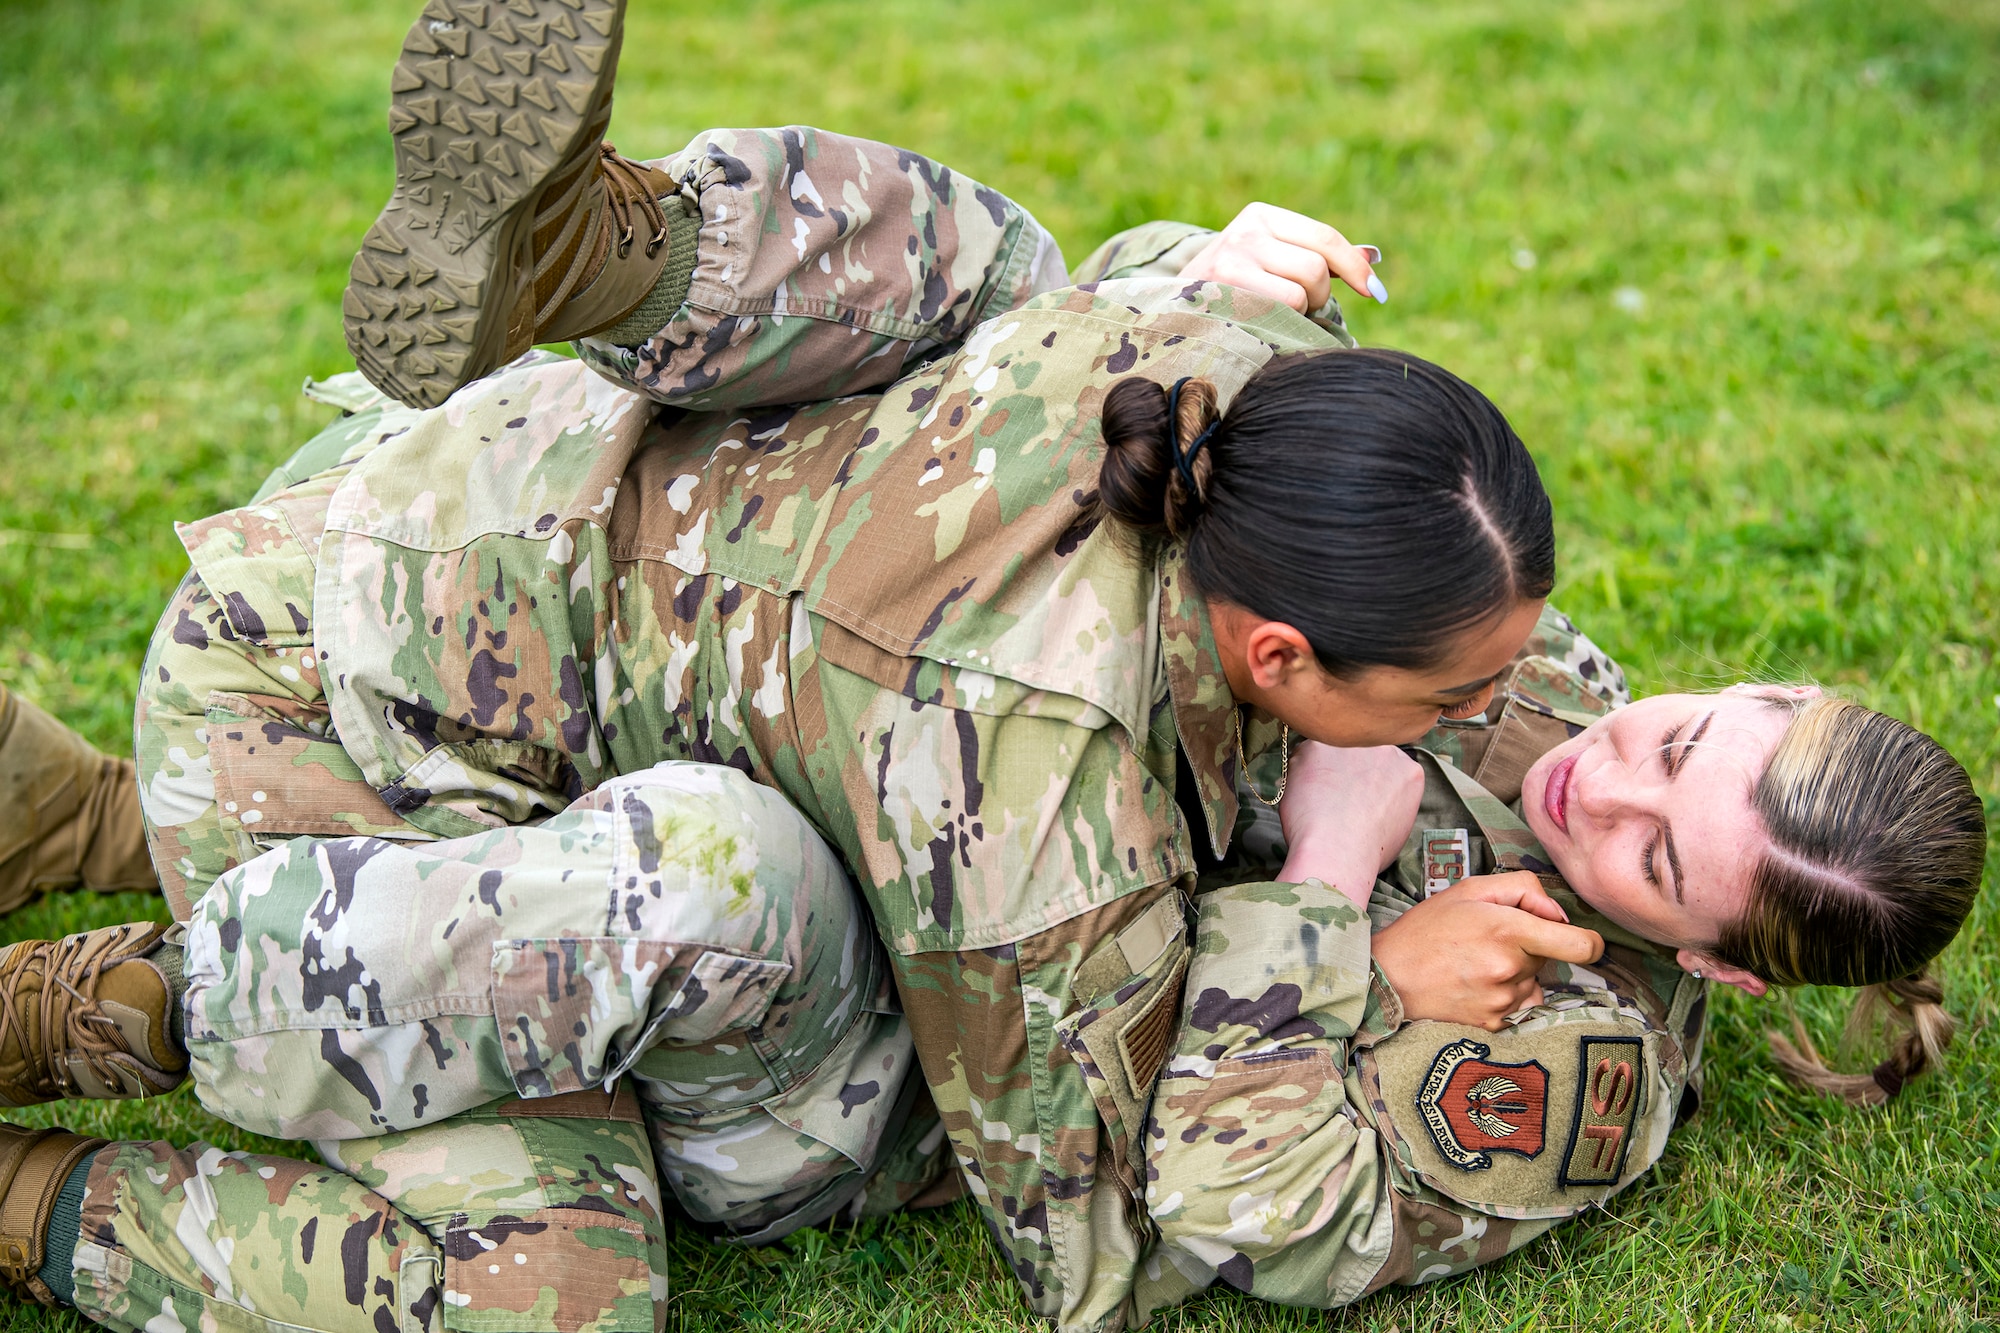 Airman 1st Class Helen Lopez, left, 423d Security Forces Squadron installation patrolman, and Airman 1st Class Sierra Capobianco, base defense operations center controller, demonstrate grappling at RAF Molesworth, England, May 10, 2022. The 423d SFS taught students from Huntingdon’s St. Peter’s school about weapons safety and self defense techniques as part of a mentorship program aimed at strengthening the relationship between the 501st Combat Support Wing and local community. (U.S. Air Force photo by Staff Sgt. Eugene Oliver)